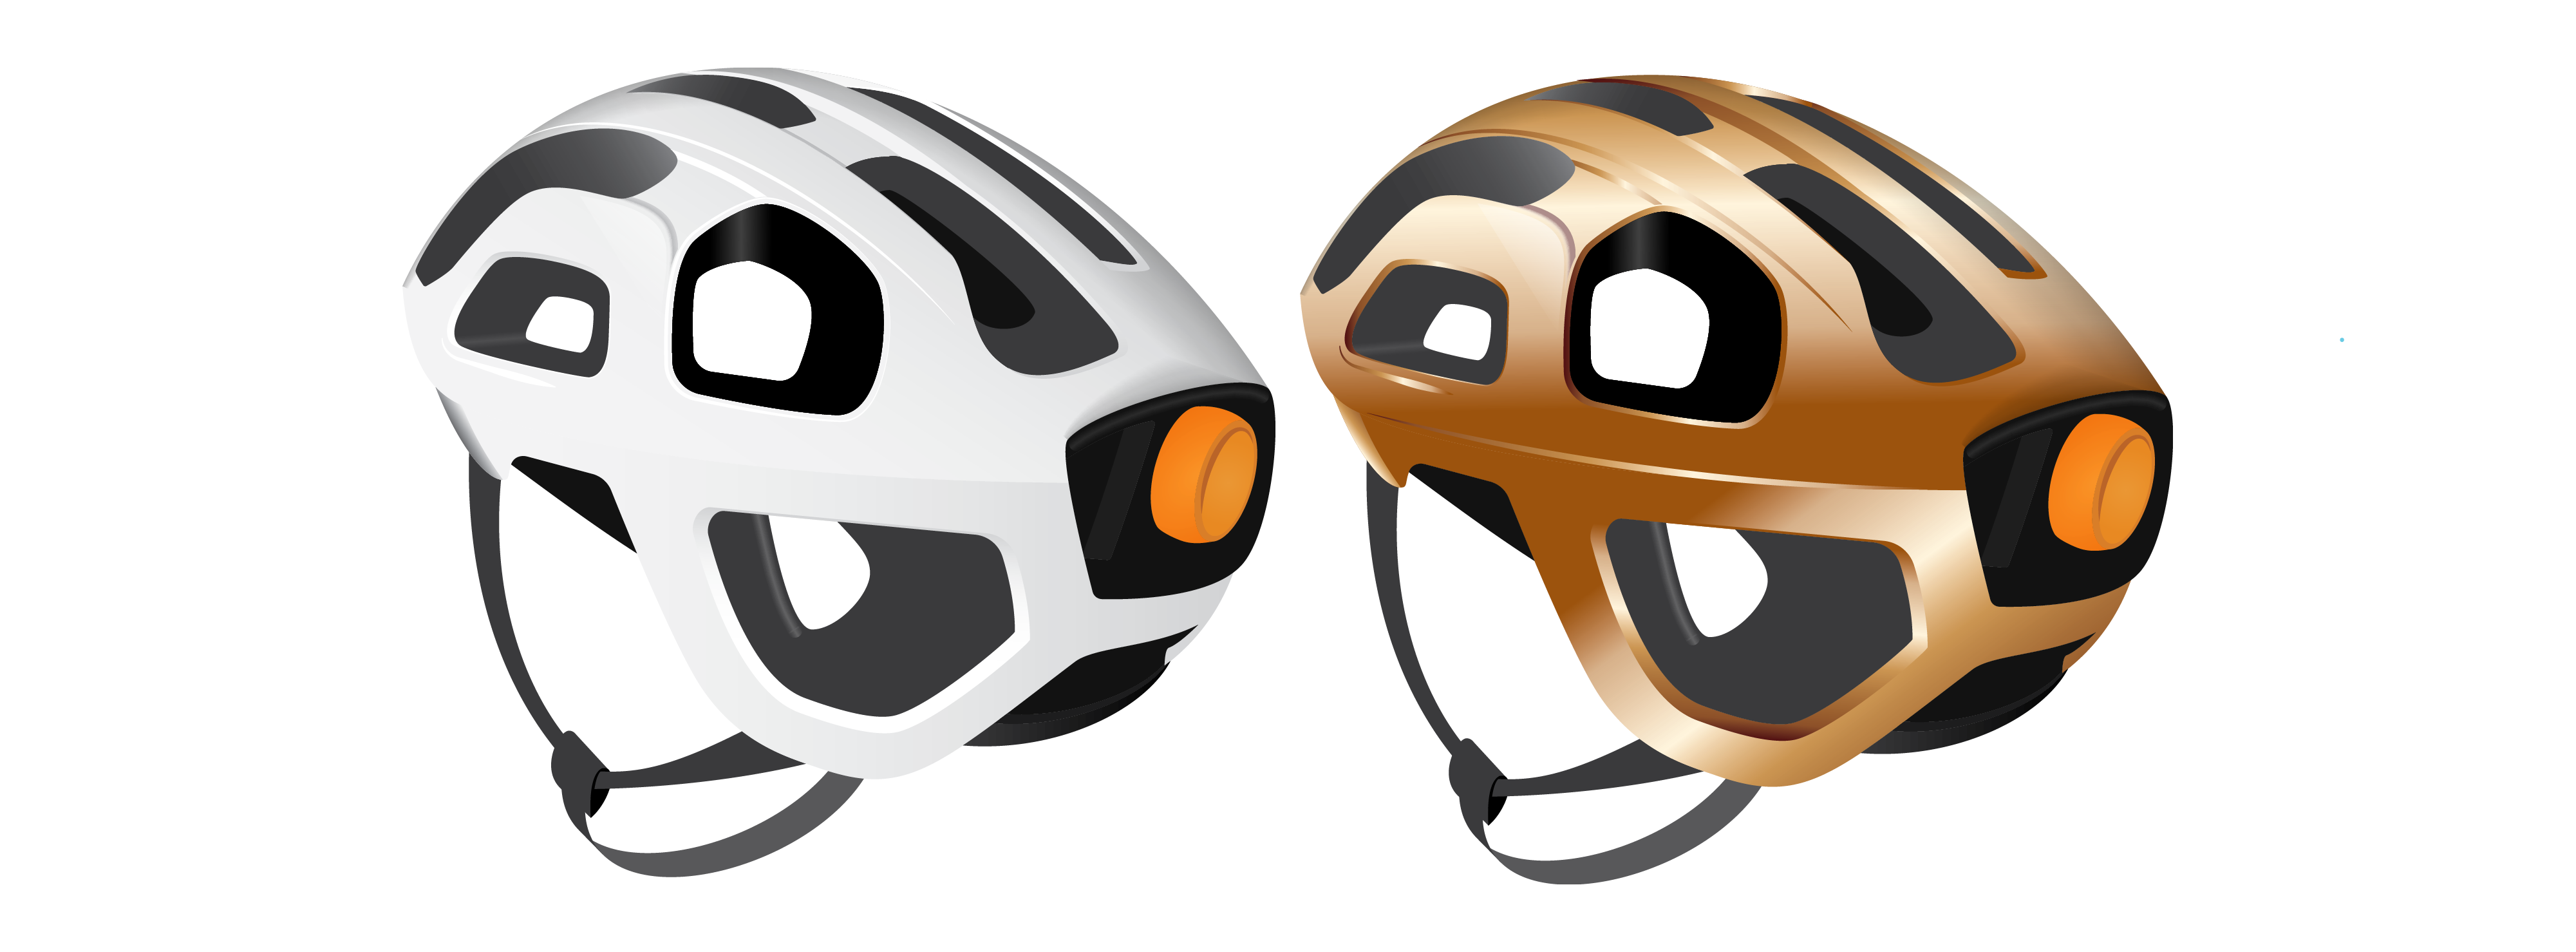 2 sports helmets. On the left, a white-coloured sports helmet. On the right, a metallic-coloured one. The holes on each helmet are lined by contrasting black material. The only colour on the helmets is an orange adjustable button on a black square at the back.